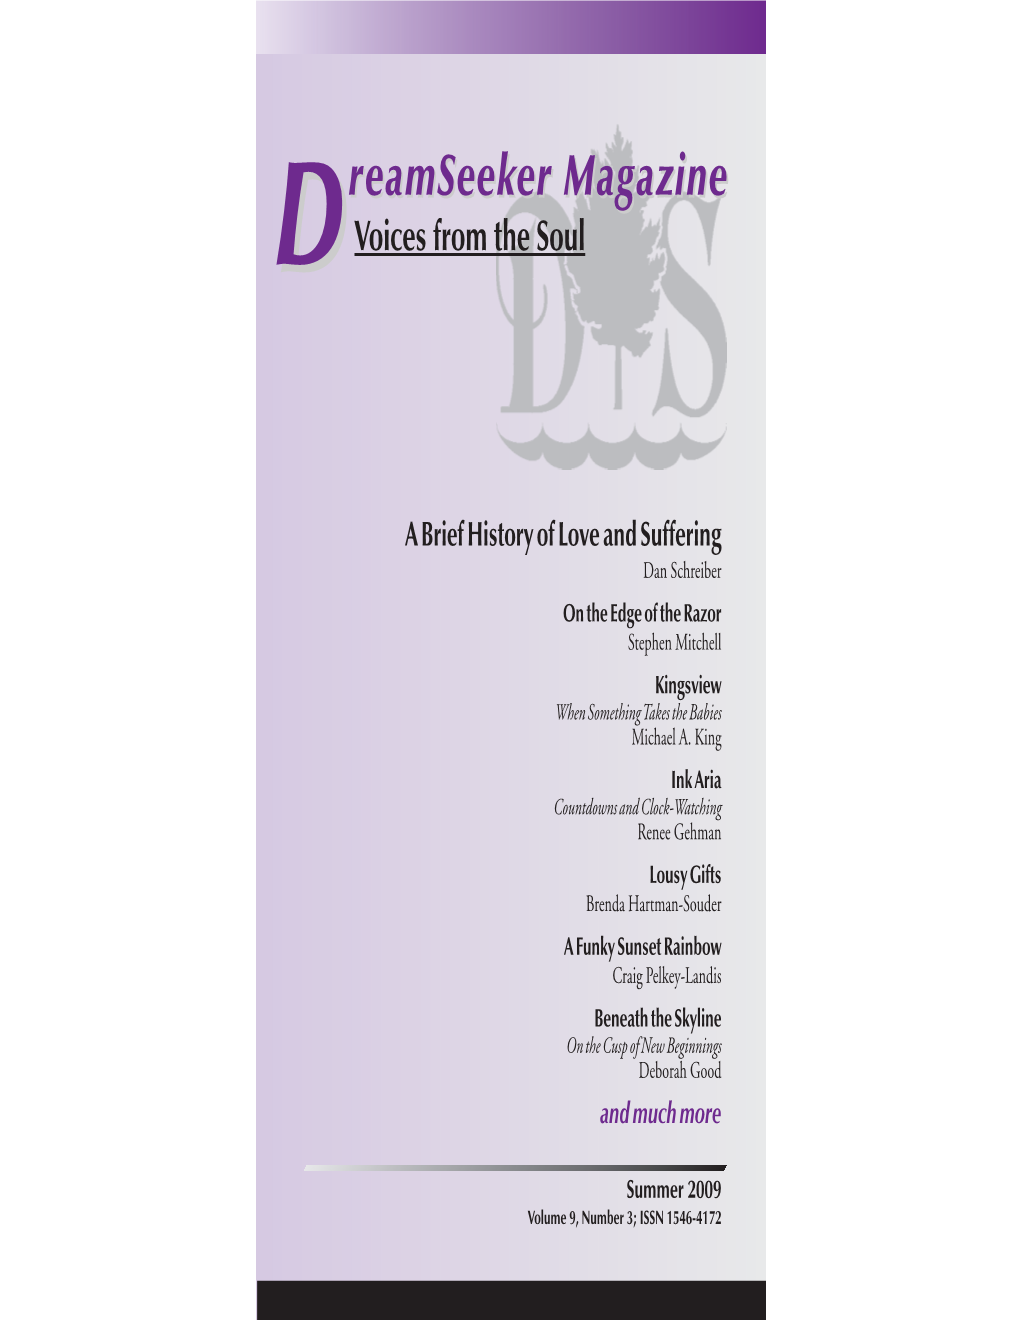 Dreamseeker Magazine Is Mennonite Women in Canada Which for Me Includes the Summer Shadows and Sunshine